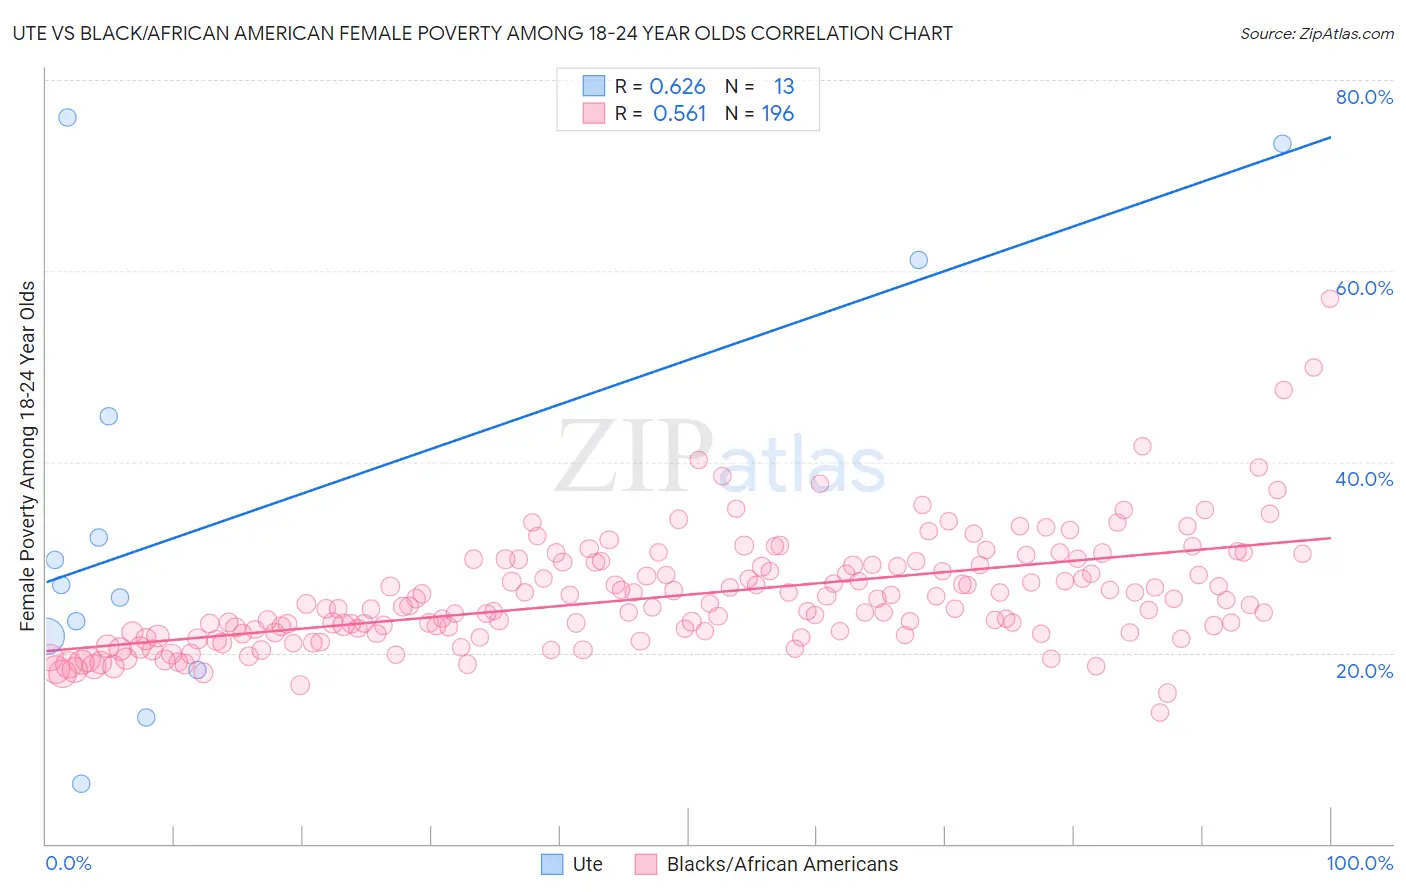 Ute vs Black/African American Female Poverty Among 18-24 Year Olds